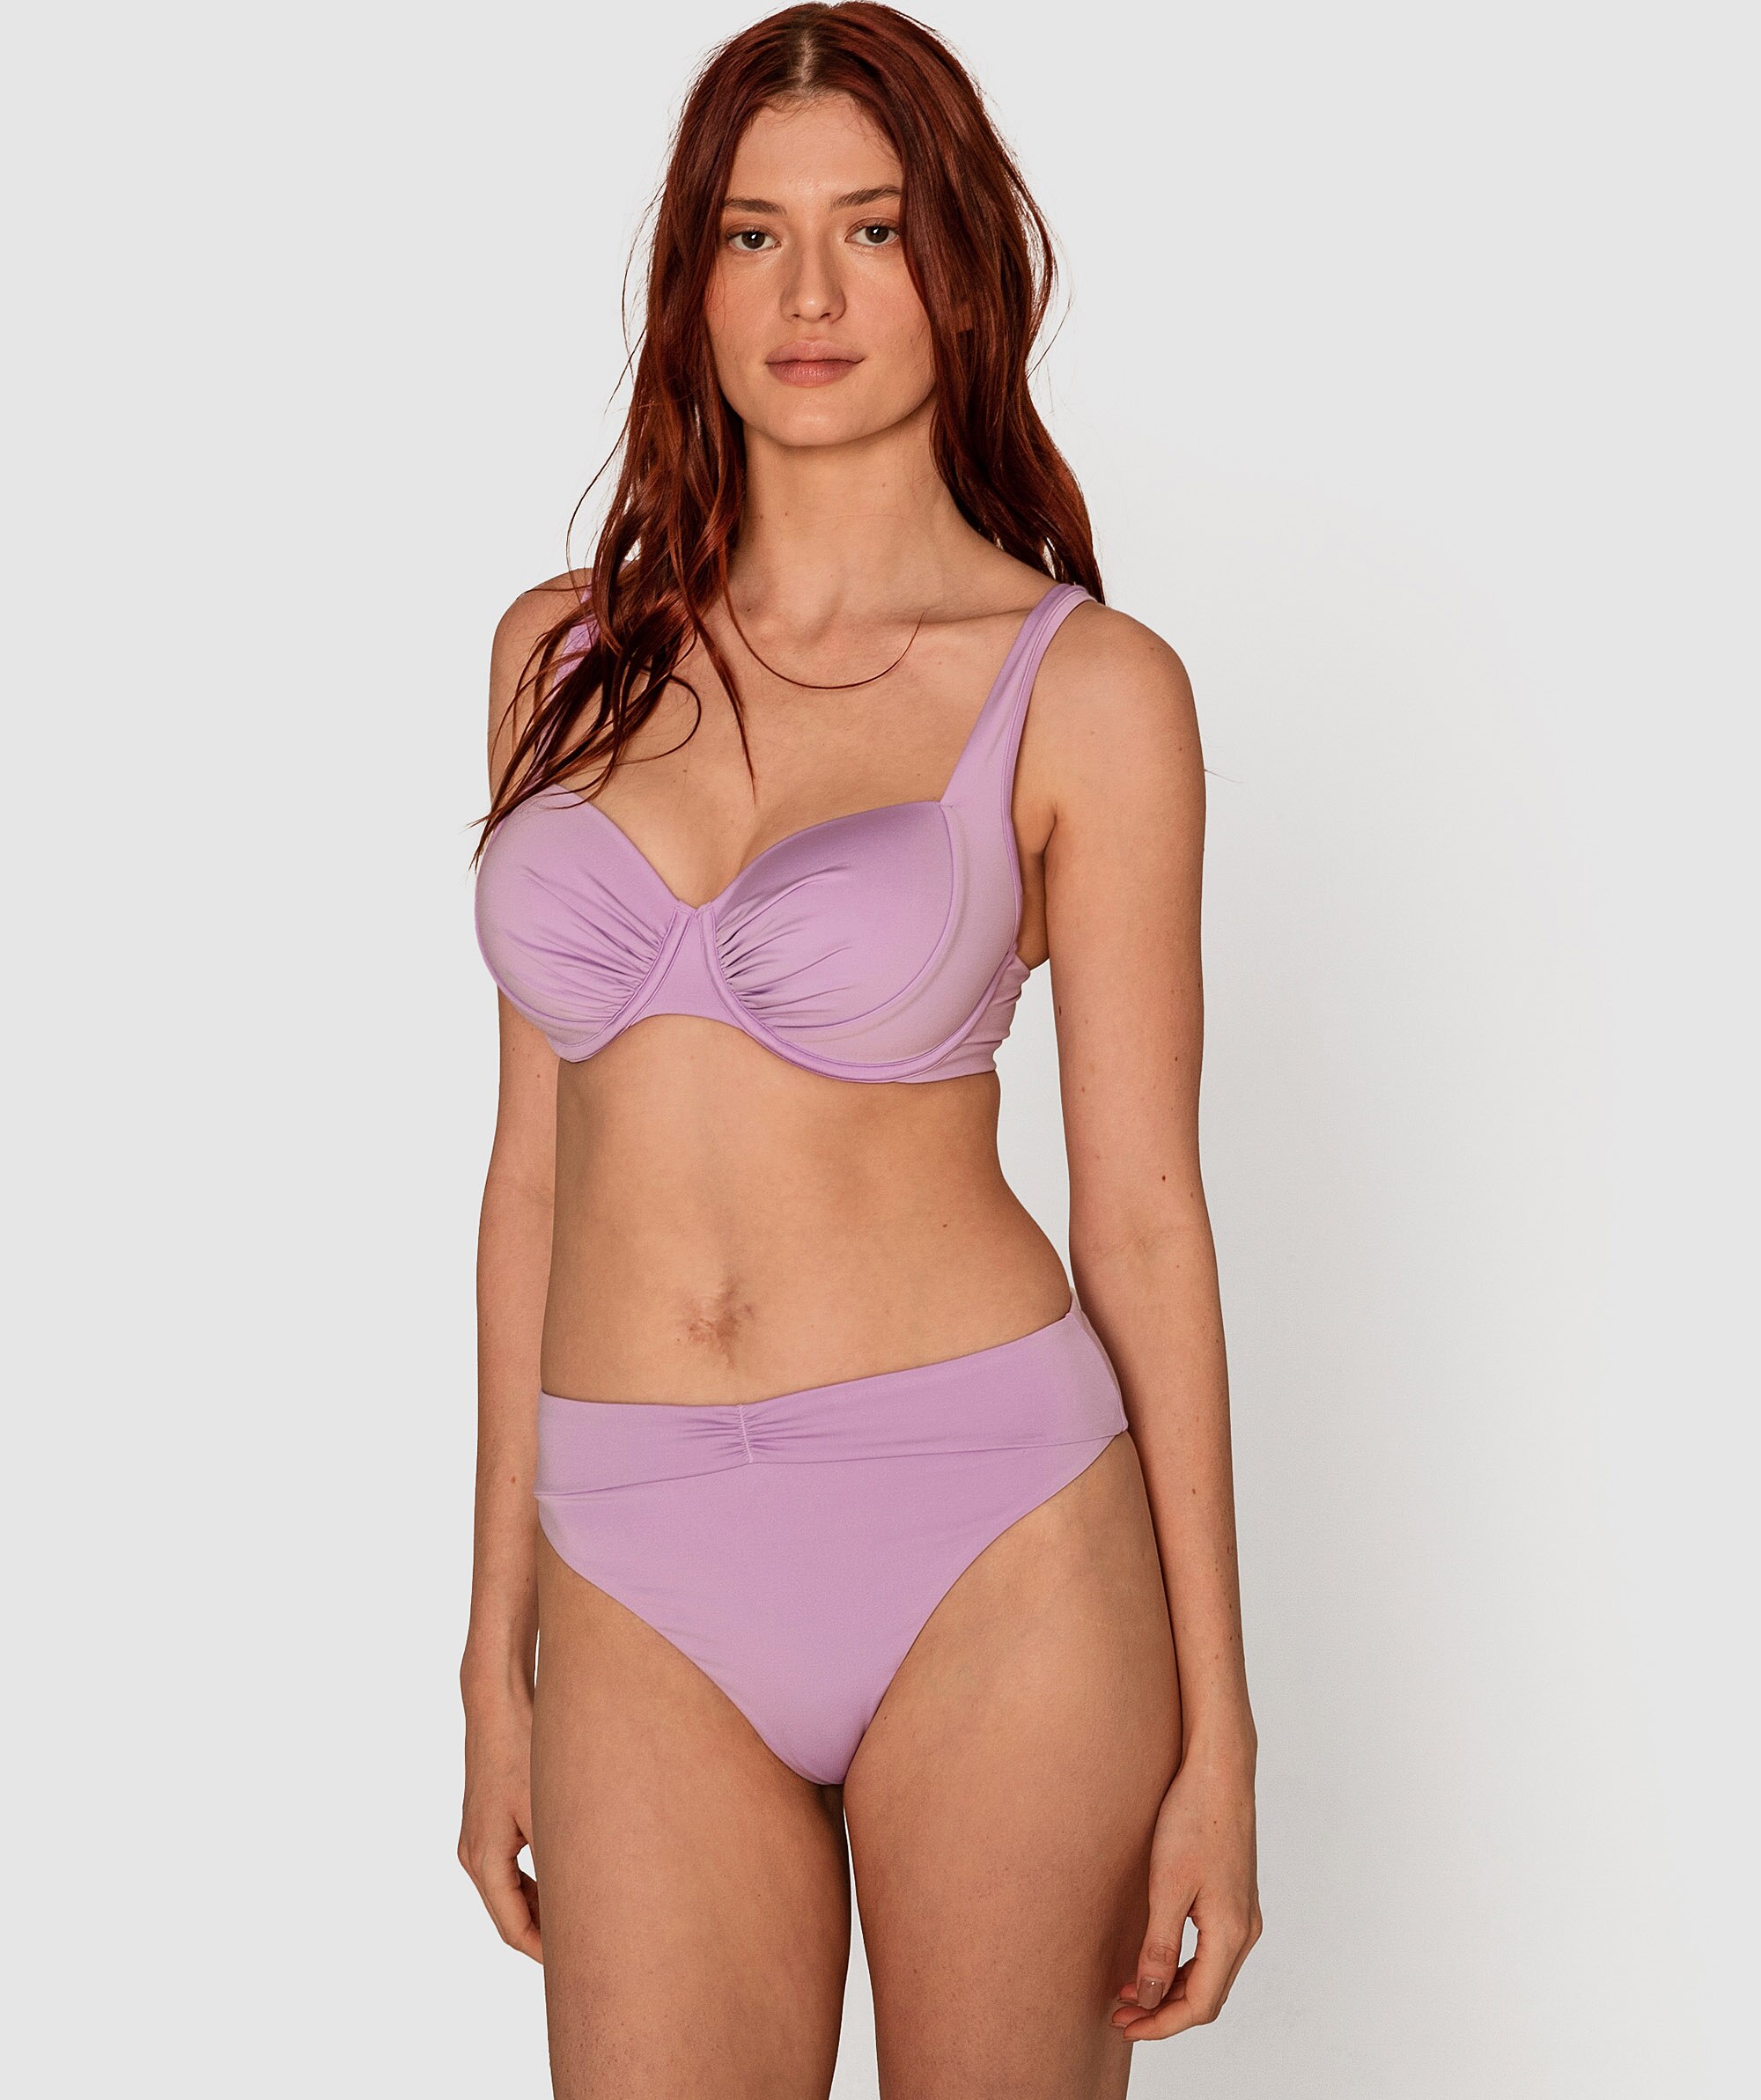 Planet Bliss Swim Full Cup Top - Lilac